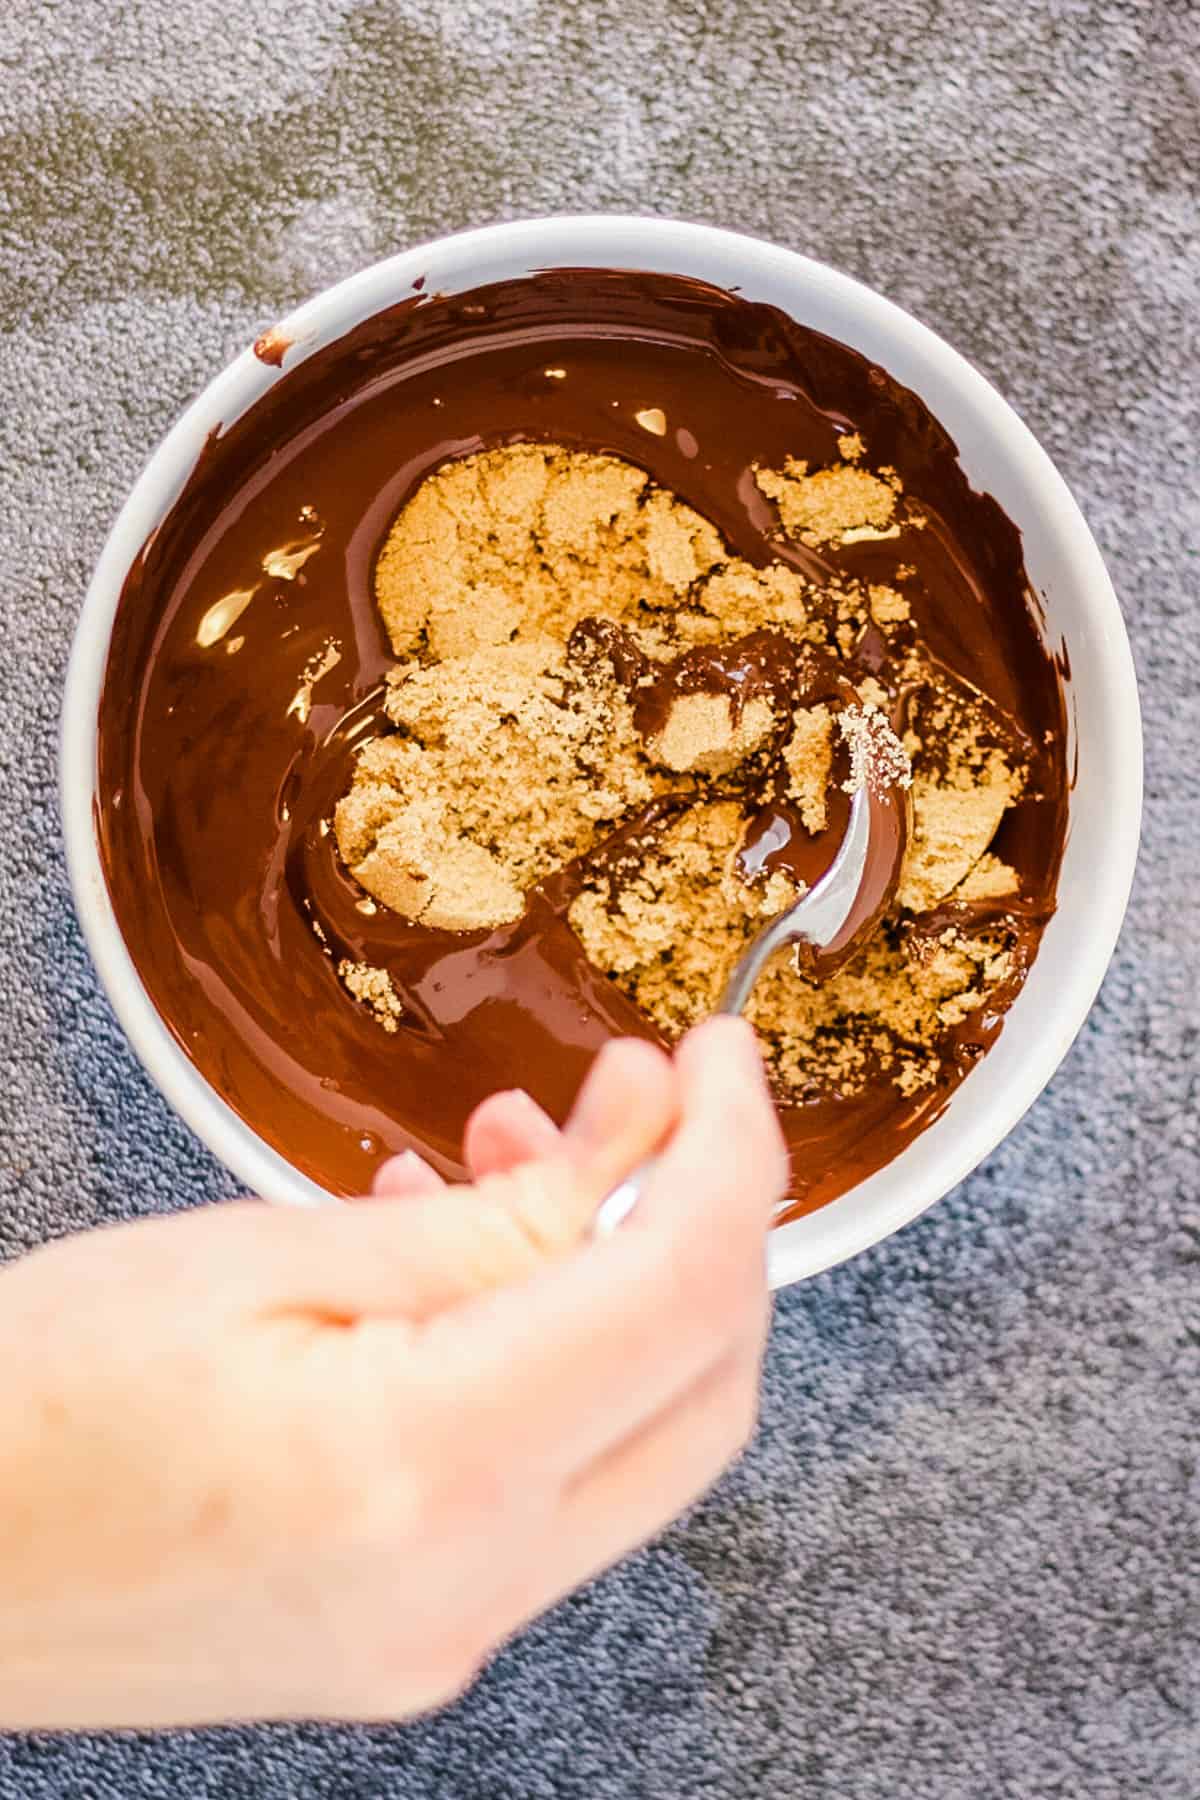 A person holding a spoon in a bowl of chocolate and enjoying rugelach.